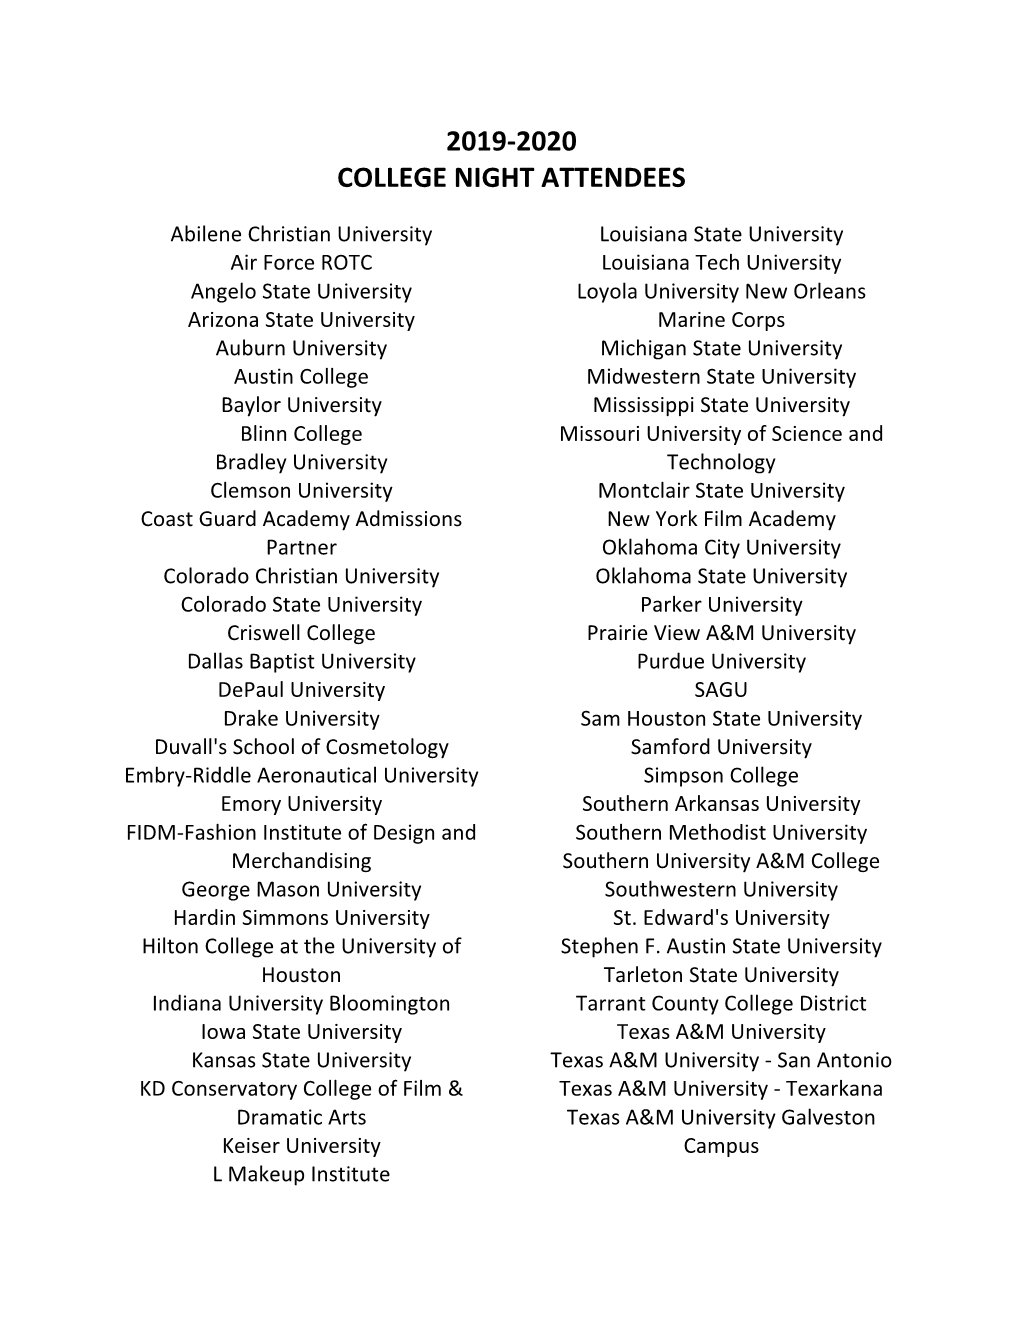 2019-2020 College Night Attendees